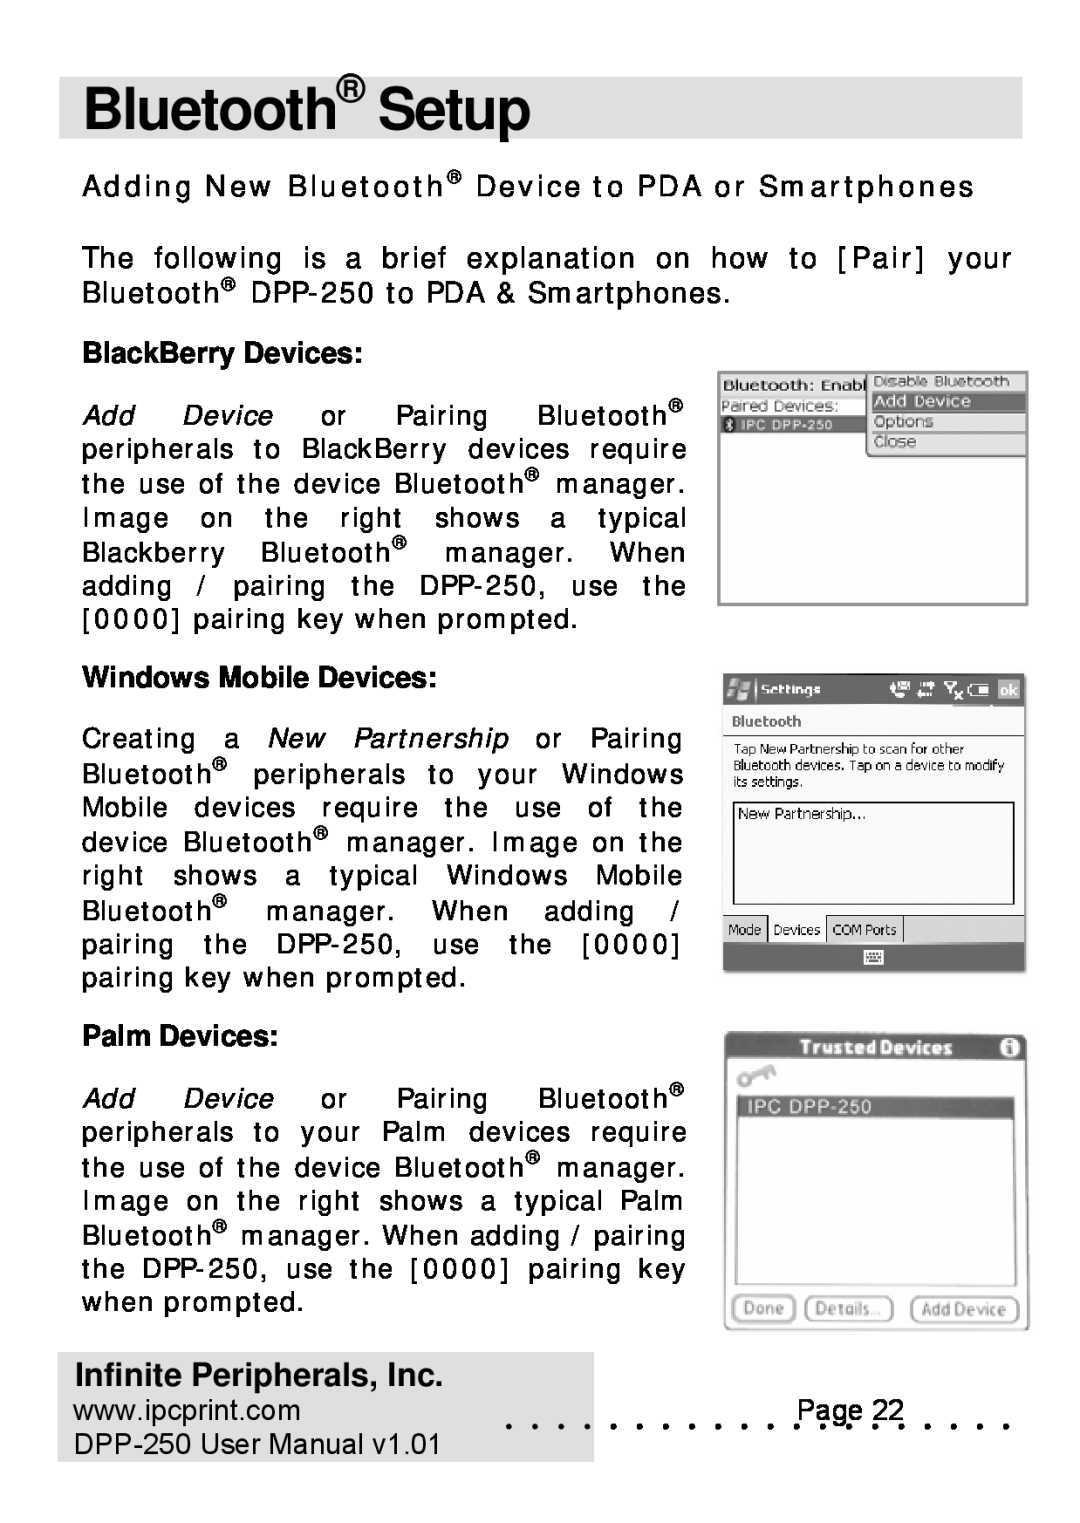 Infinite Peripherals DPP-250 user manual Bluetooth Setup, BlackBerry Devices, Windows Mobile Devices, Palm Devices 